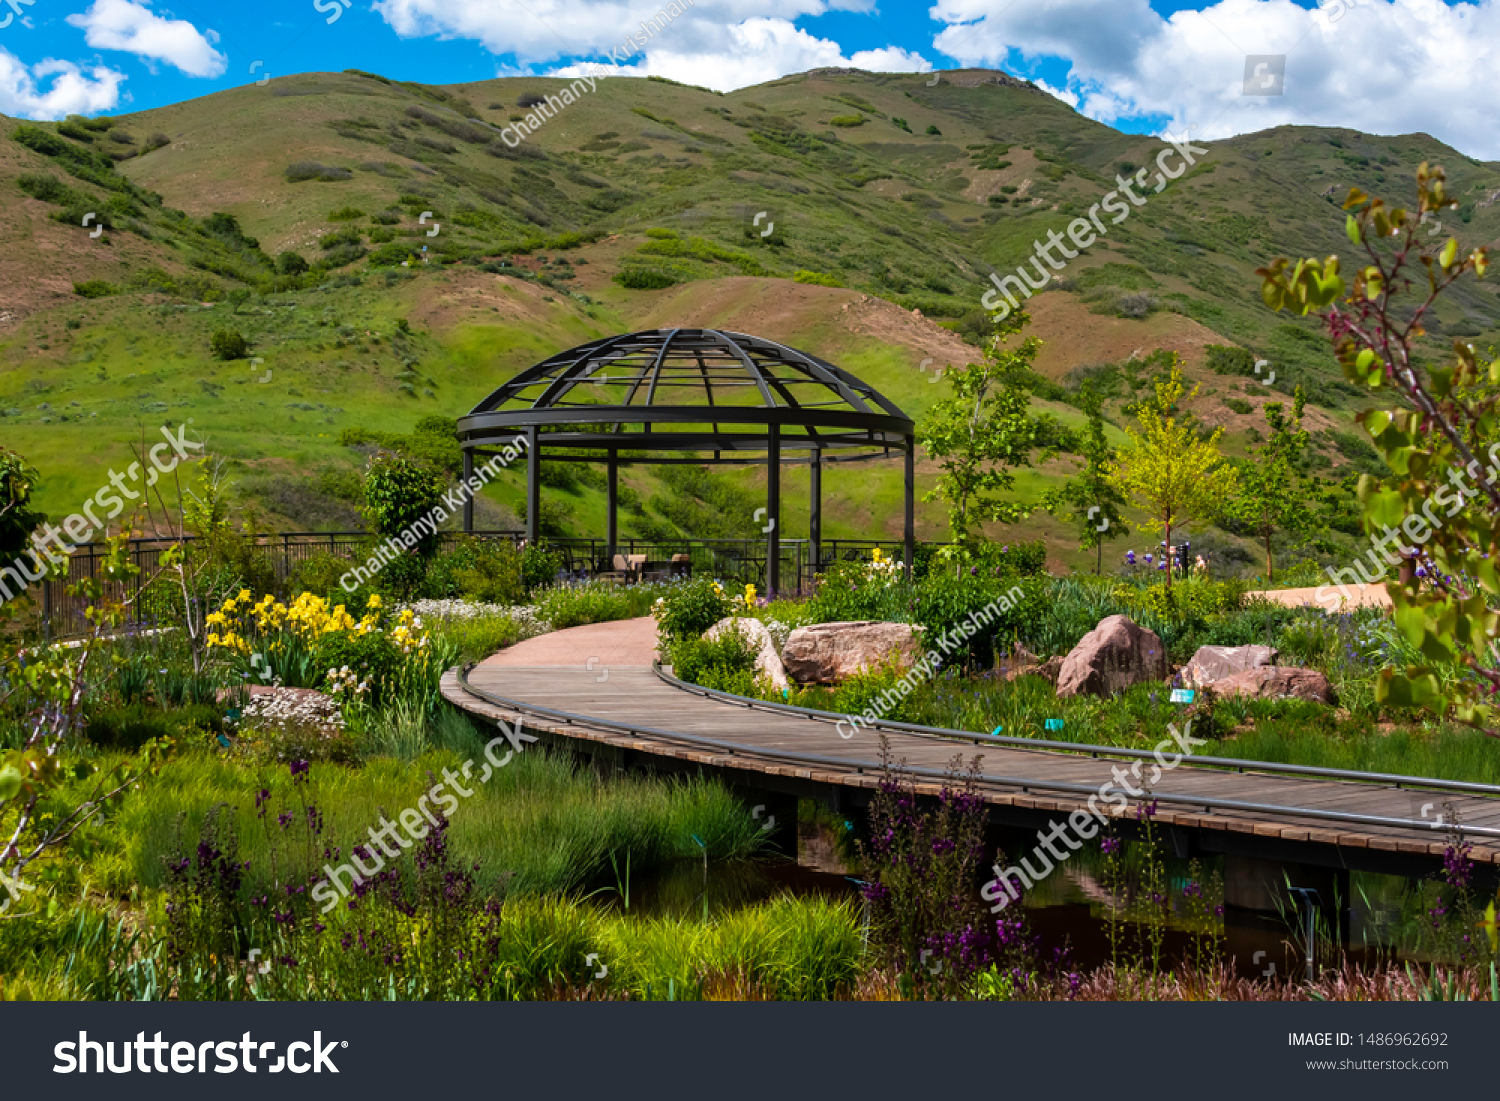 Bed Flowers Gardens Inside Red Butte Stock Photo Edit Now 1486962692